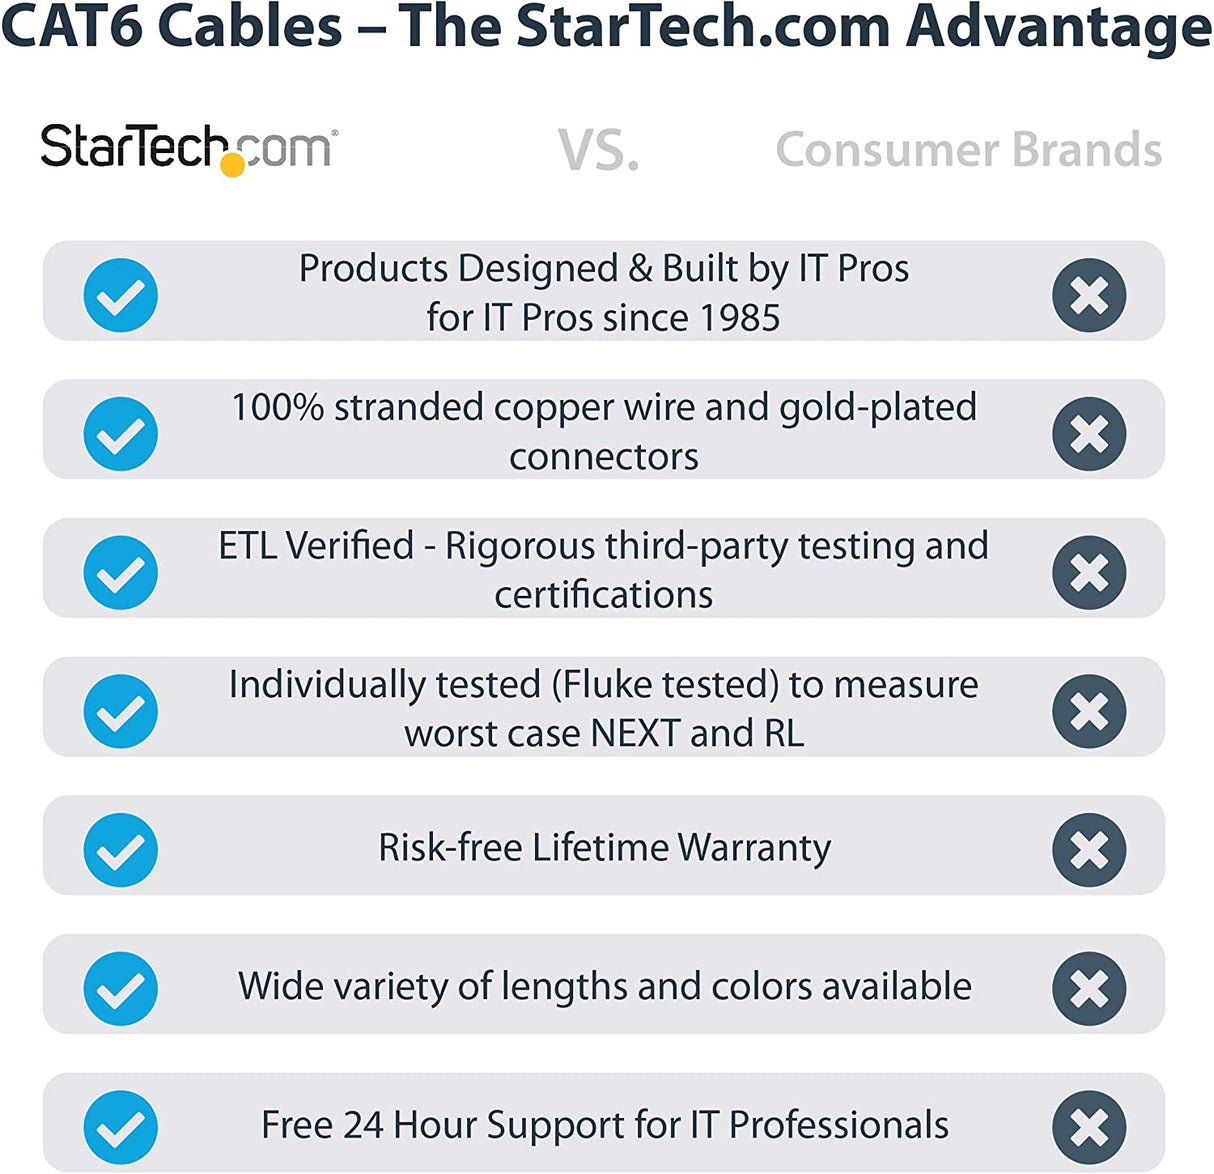 StarTech.com 25ft CAT6 Ethernet Cable - Black CAT 6 Gigabit Ethernet Wire -650MHz 100W PoE++ RJ45 UTP Molded Category 6 Network/Patch Cord w/Strain Relief/Fluke Tested UL/TIA Certified (C6PATCH25BK) Black 25 ft / 7.6 m 1 Pack